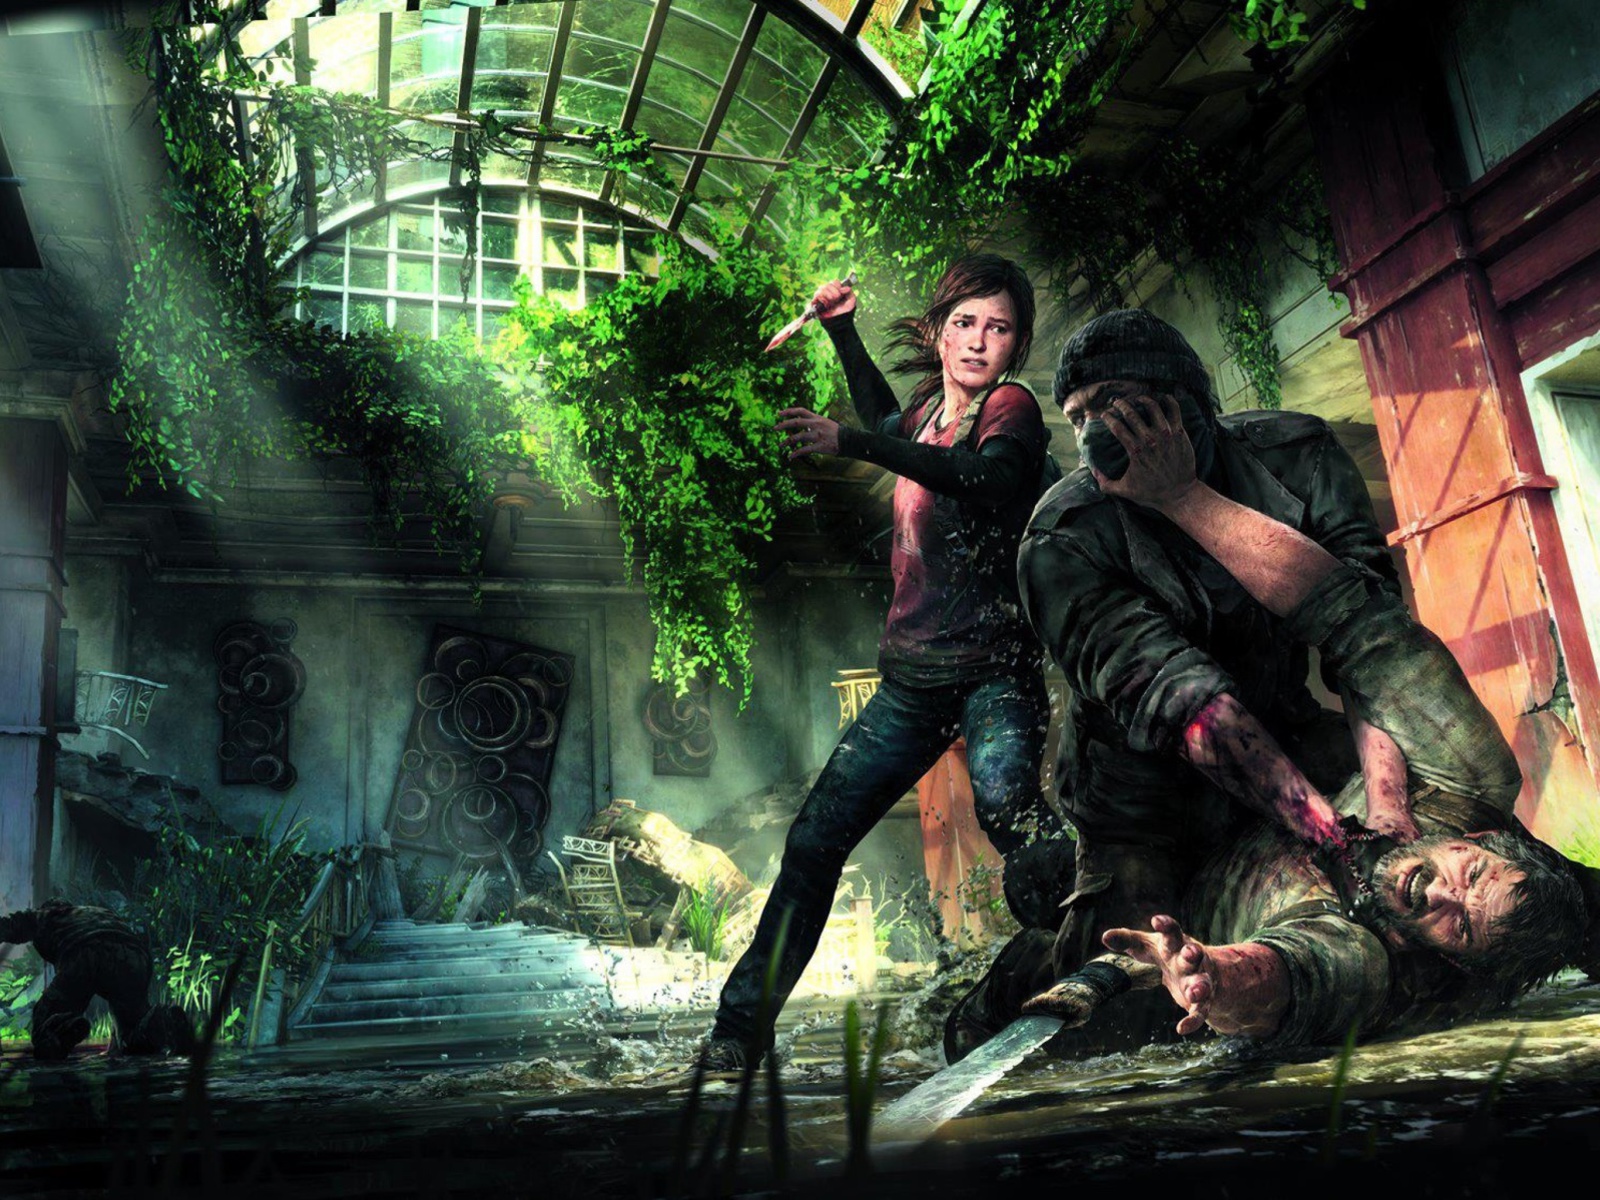 The Last Of Us Naughty Dog for Playstation 3 wallpaper 1600x1200